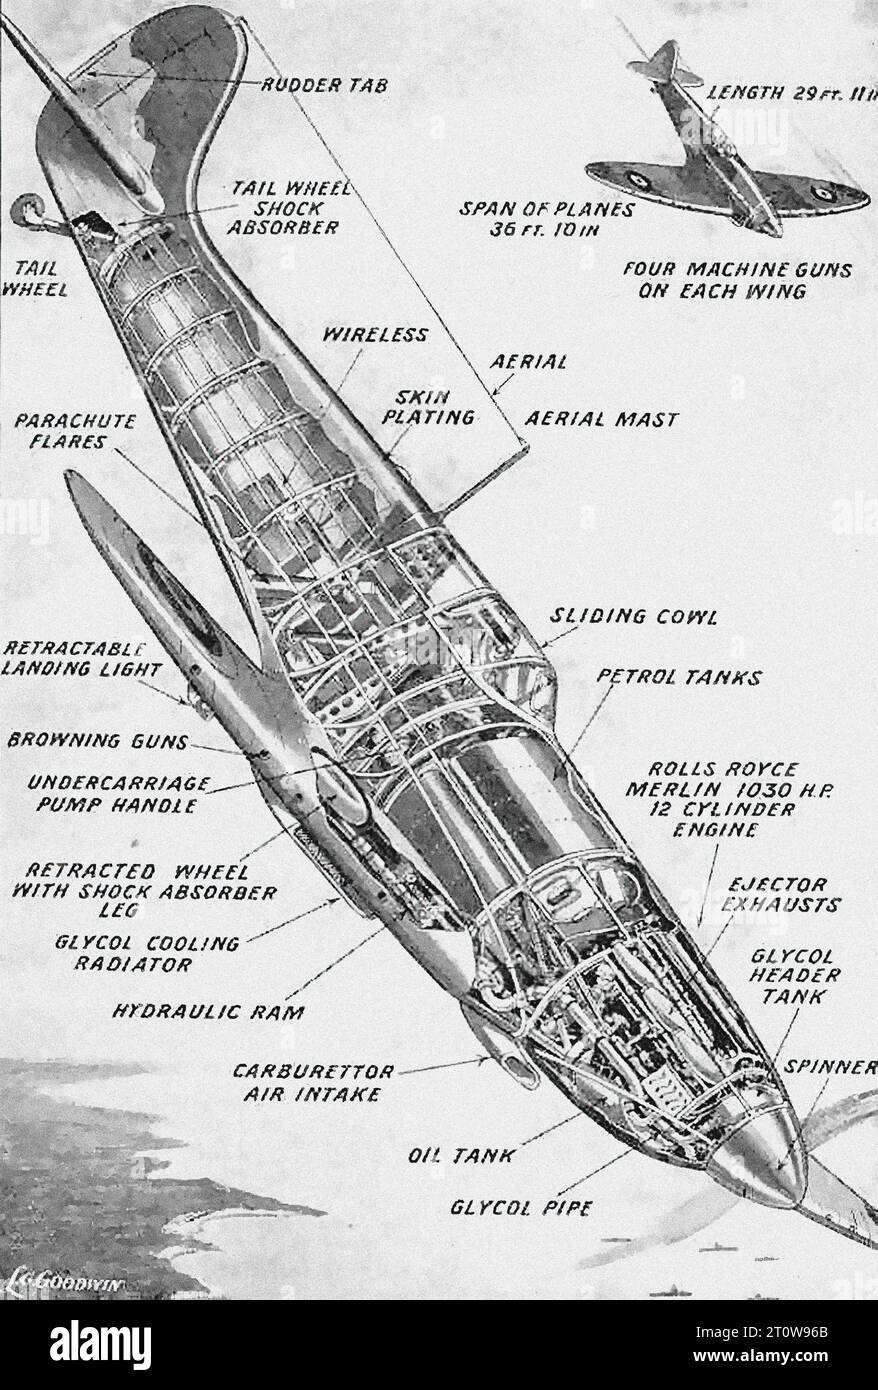 Illustrated Armament Description, British Newspaper - United Kingdom, Second World War : The image is a black and white illustration of a vintage airplane. The airplane, shown in a side view with the nose pointing towards the top right corner of the image, has four wings, two on each side, with the top wings being longer than the bottom ones. The body of the airplane is long and narrow with a pointed nose and a tail section with a rudder. The airplane has two sets of wheels, one at the front and one at the back. Various labels and annotations on the image point out different parts of the airpl Stock Photo